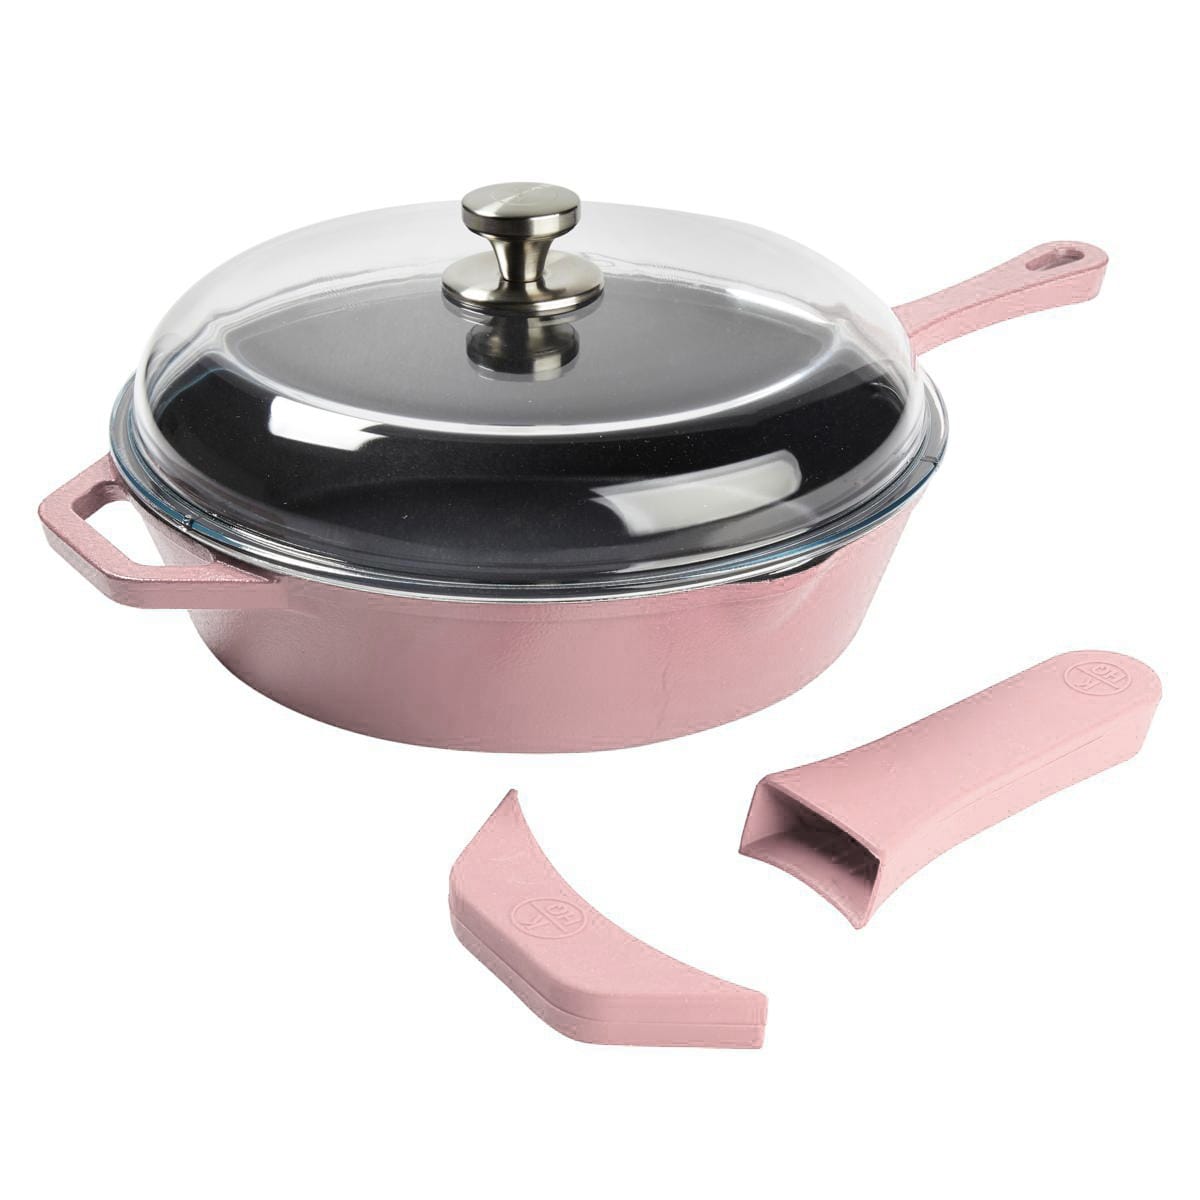 https://ak1.ostkcdn.com/images/products/is/images/direct/c85211e3f73c05f9ce04e810d5bd0d096327bc90/Kitchen-HQ-4.5-Quart-Cast-Iron-Nonstick-Fryer-Refurbished.jpg